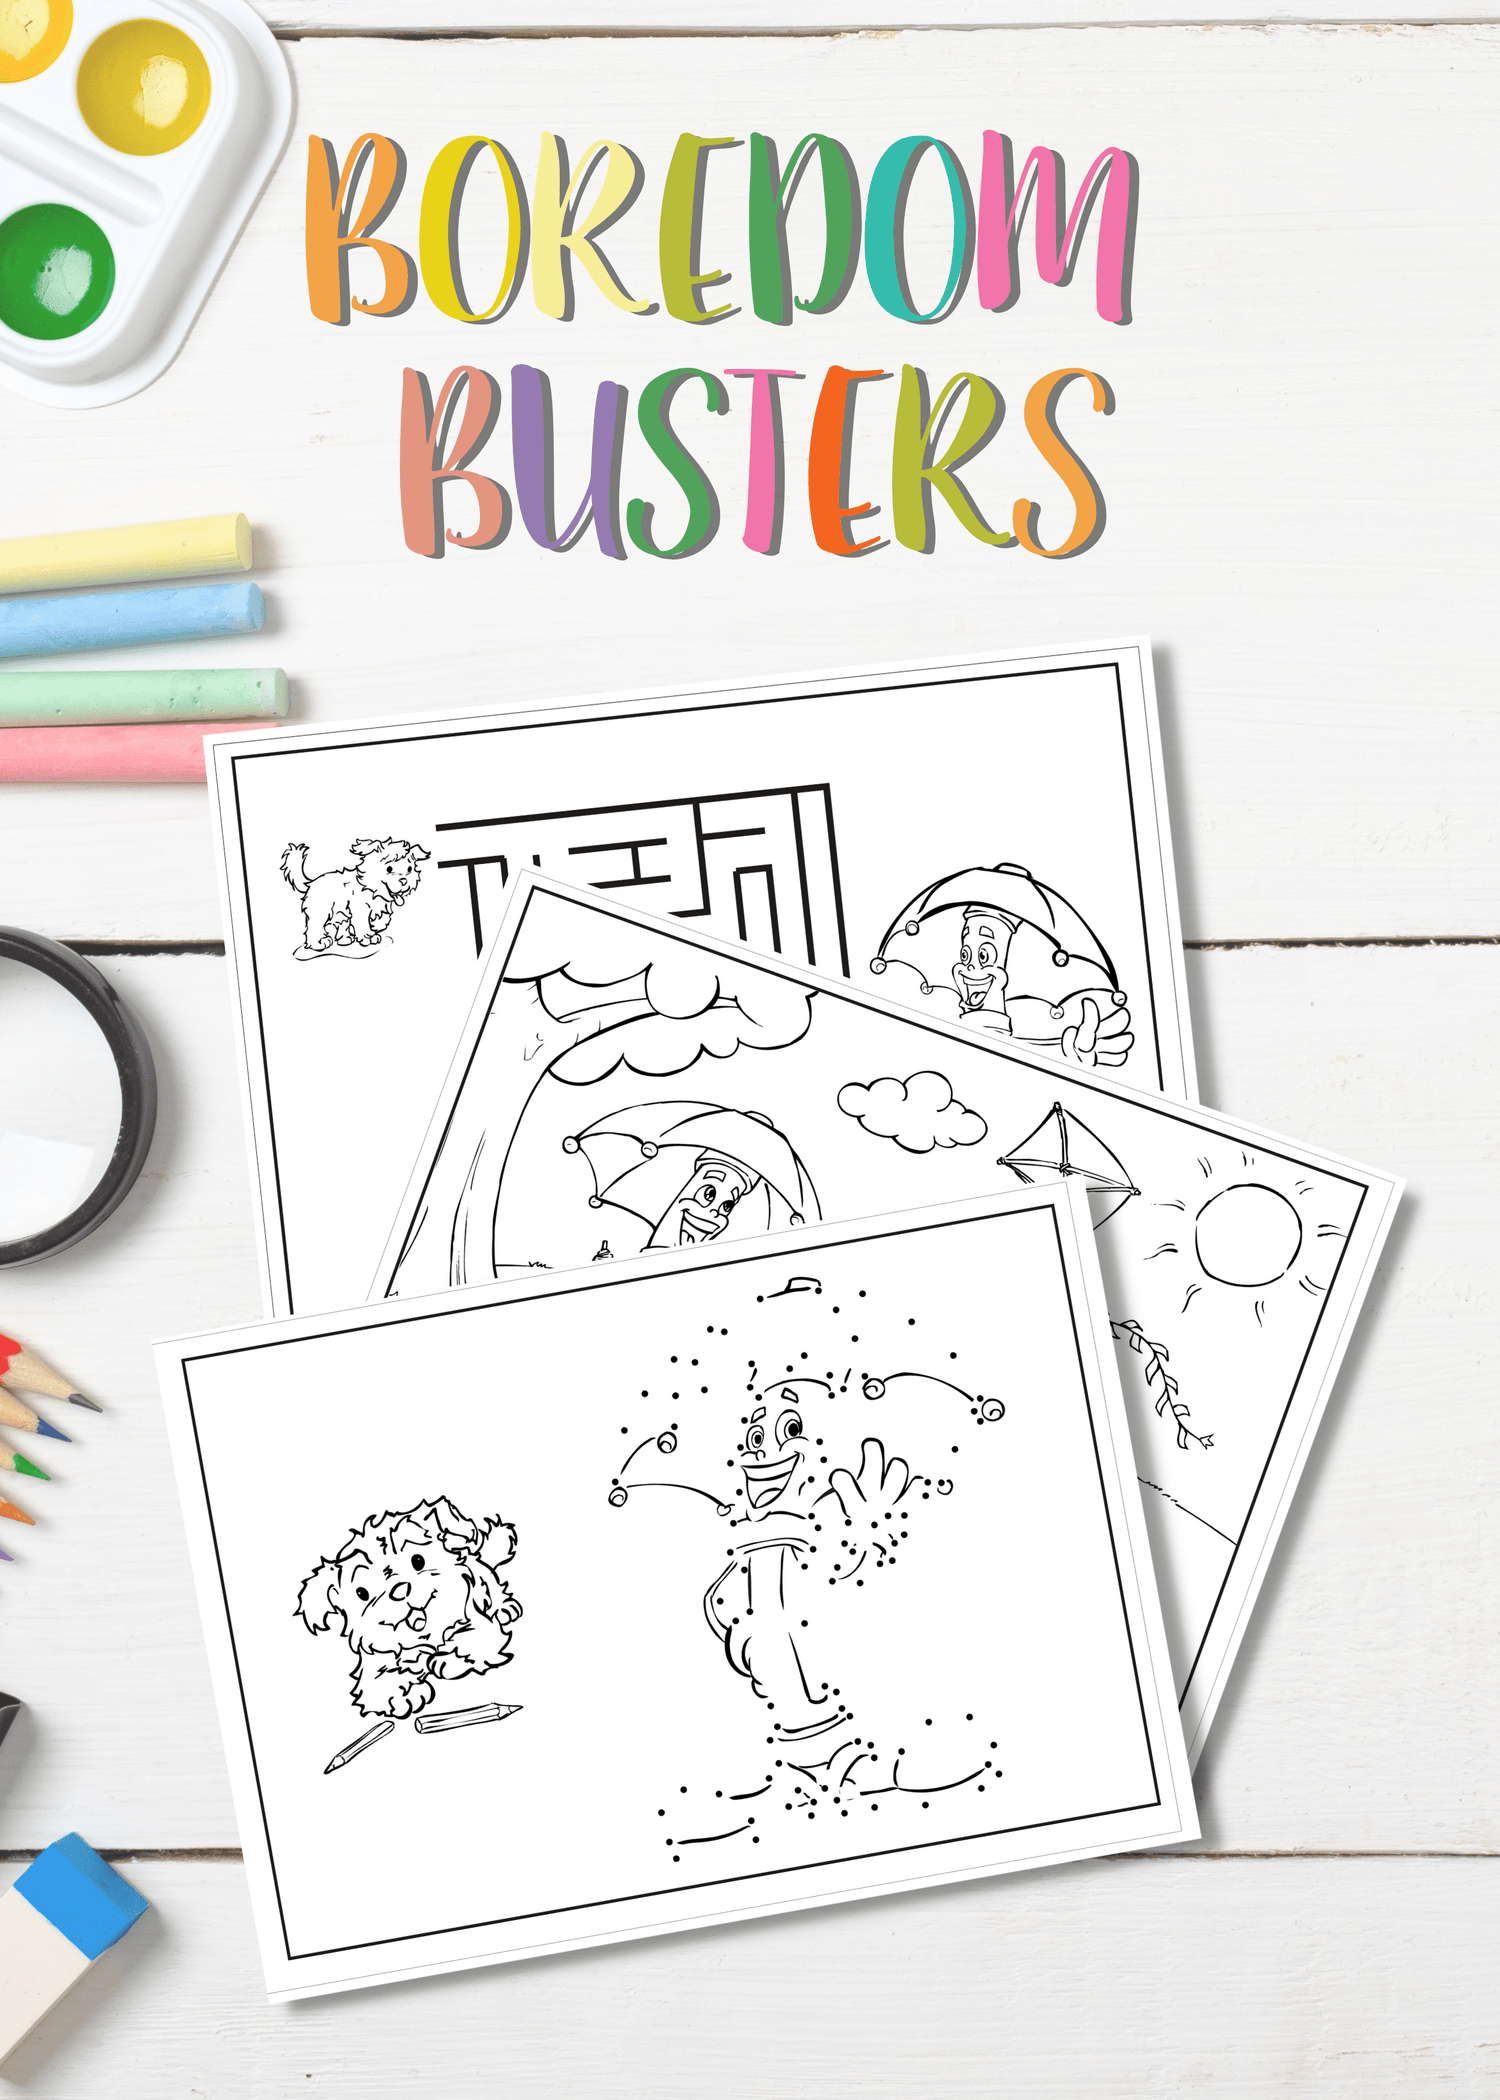 Boredom Busters Cover Image, featuring 3 pages from the Boredom Busters printable